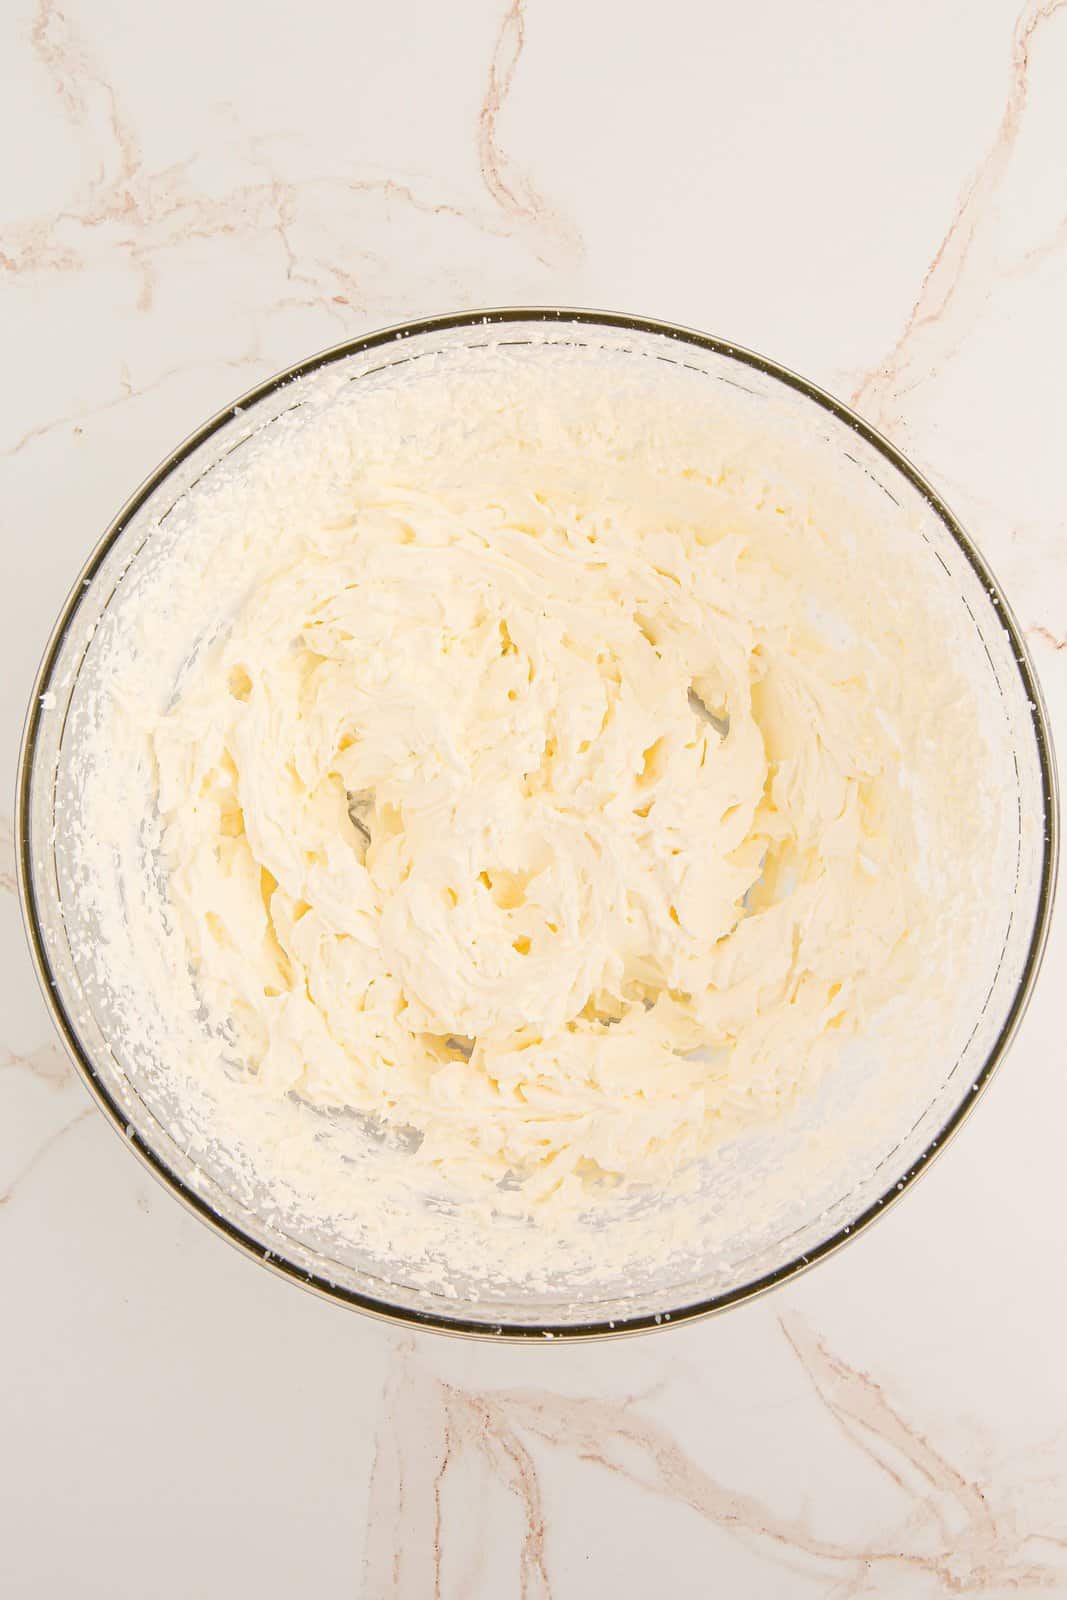 Heavy cream whipped in bowl.